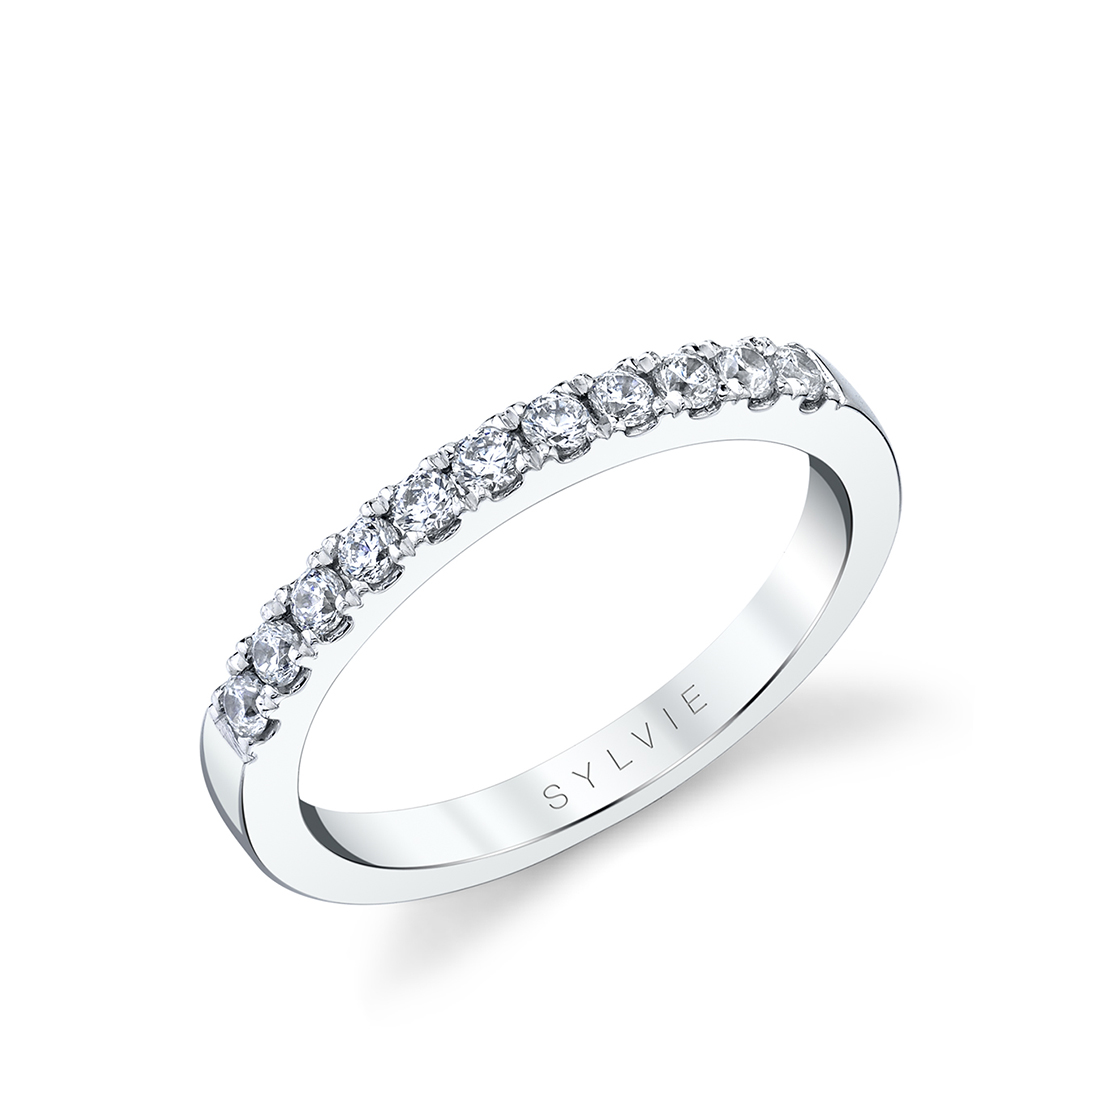 Oval Cut Three Stone Halo Engagement Ring with Baguettes - Vicky